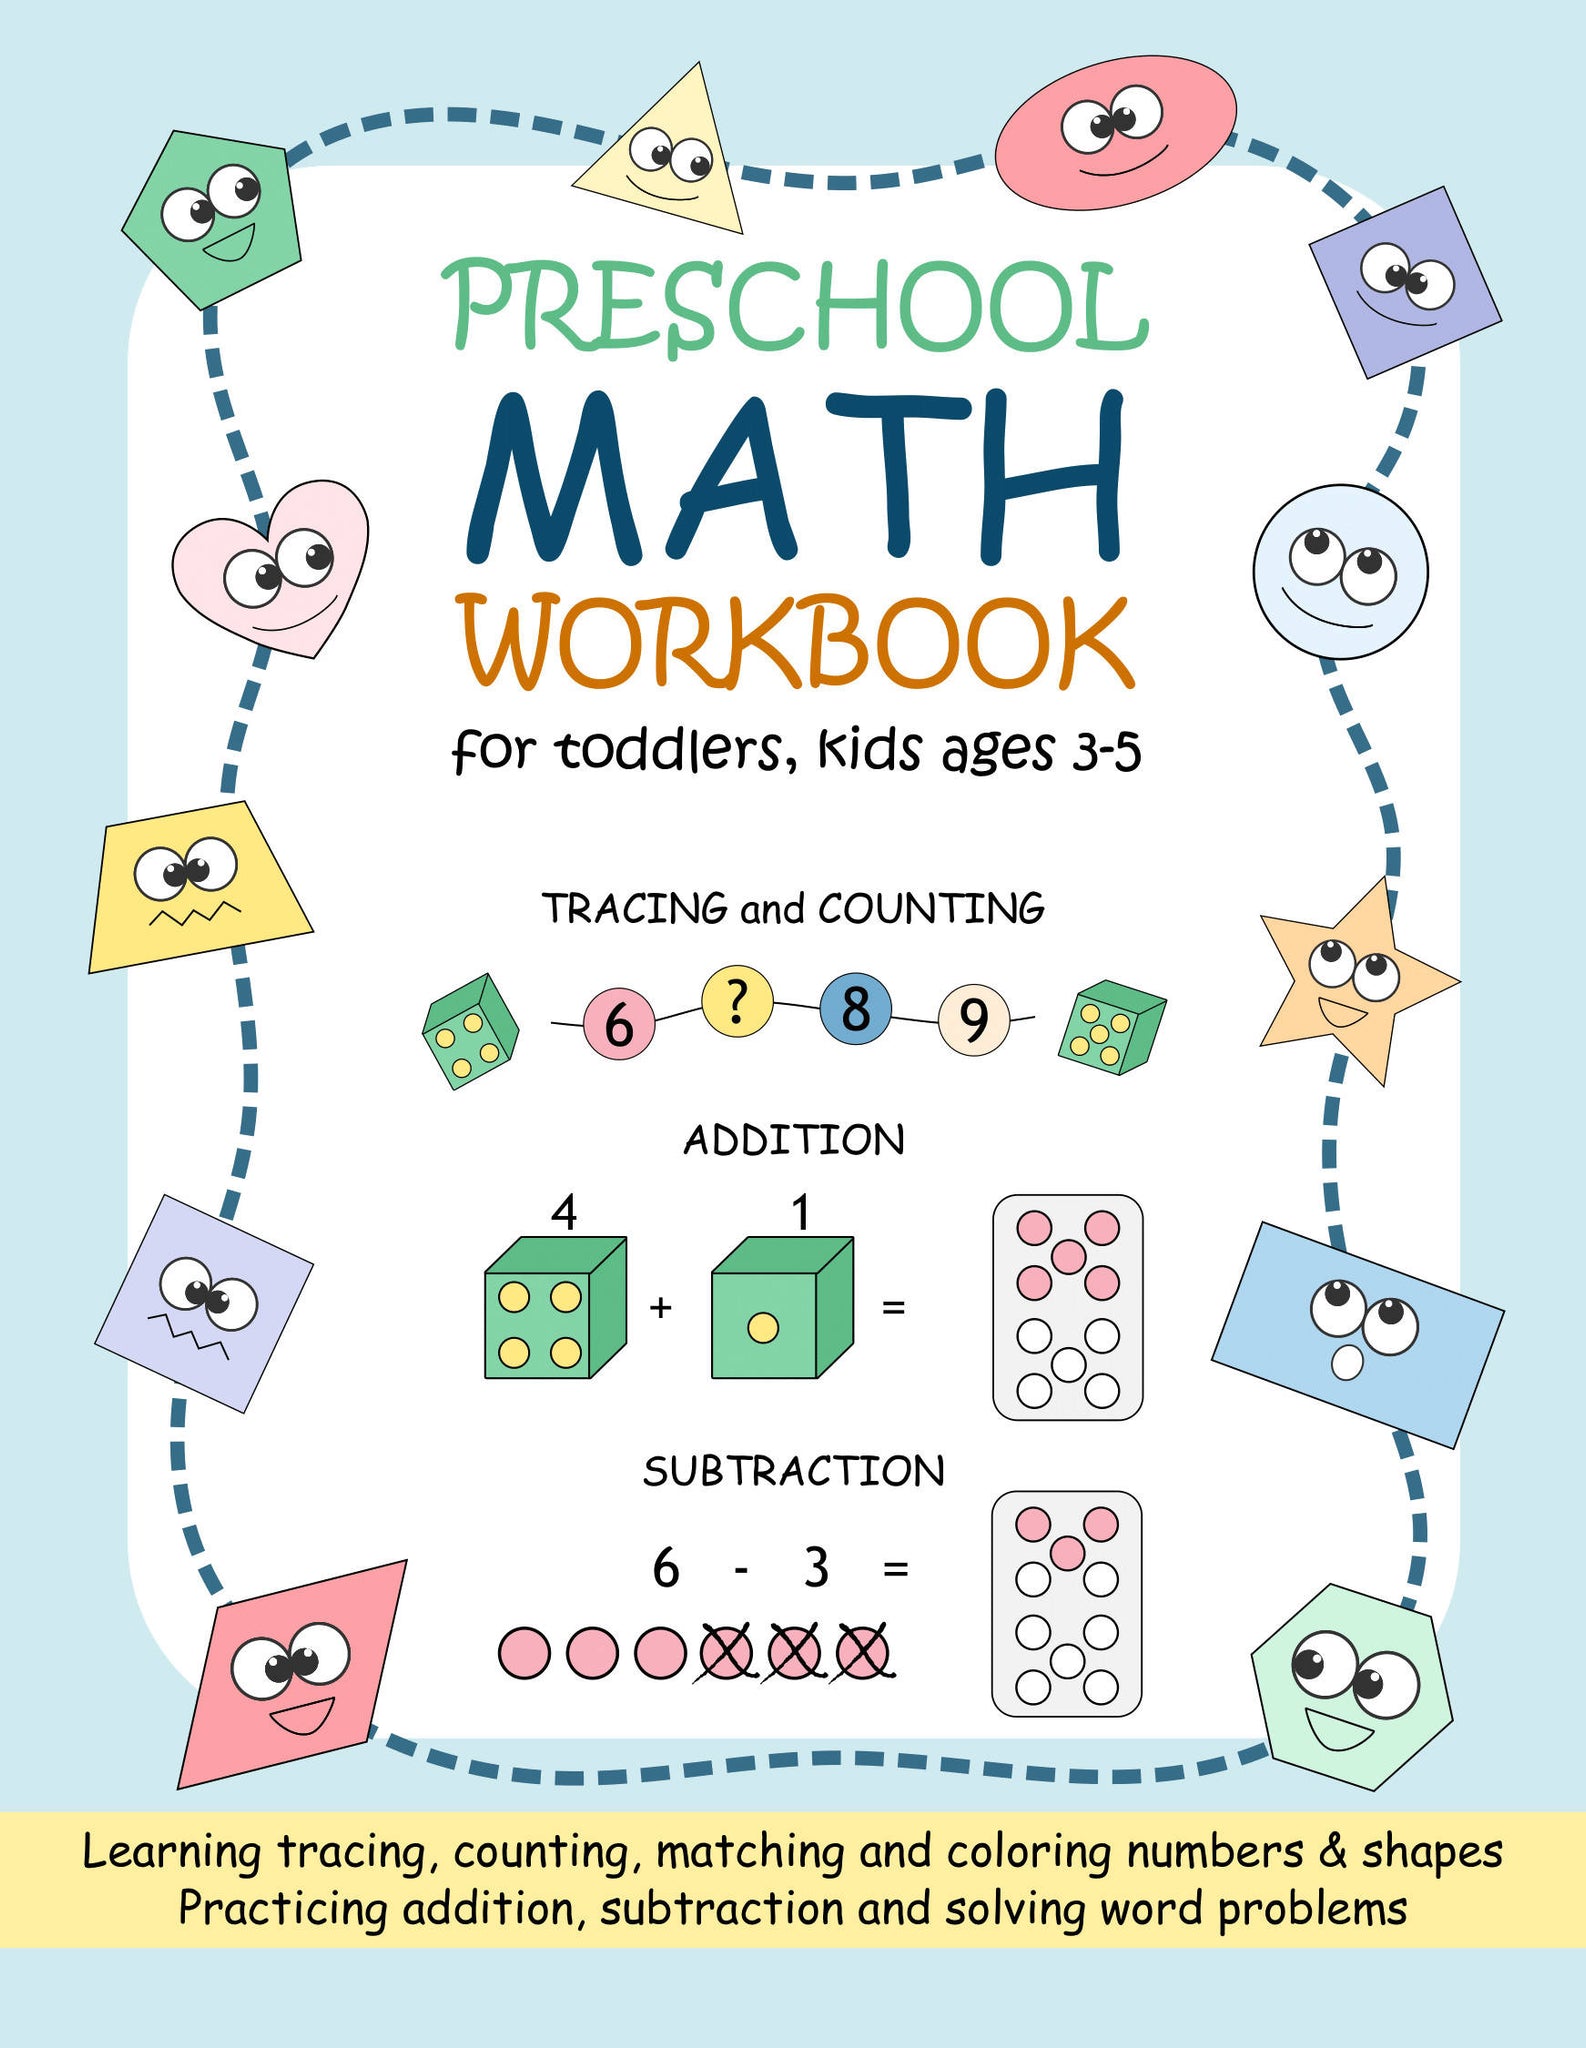 Preschool Math Workbook for Toddlers, Kids Ages 3-5: